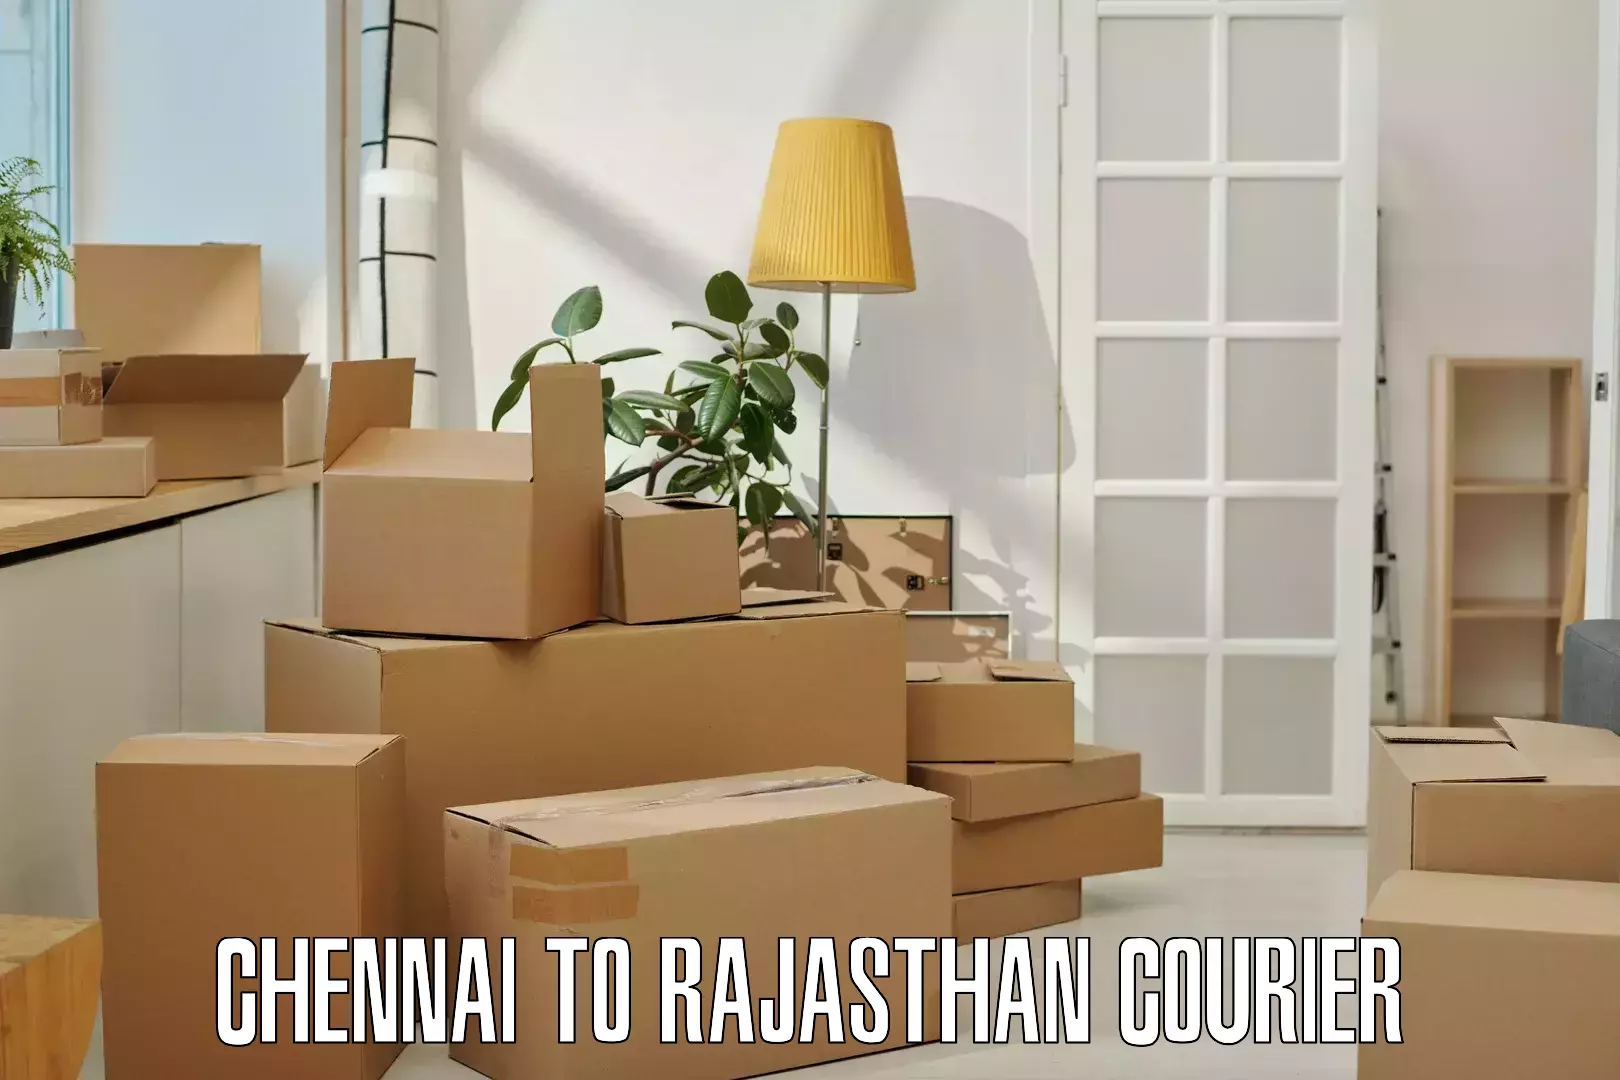 Courier insurance in Chennai to Parbatsar